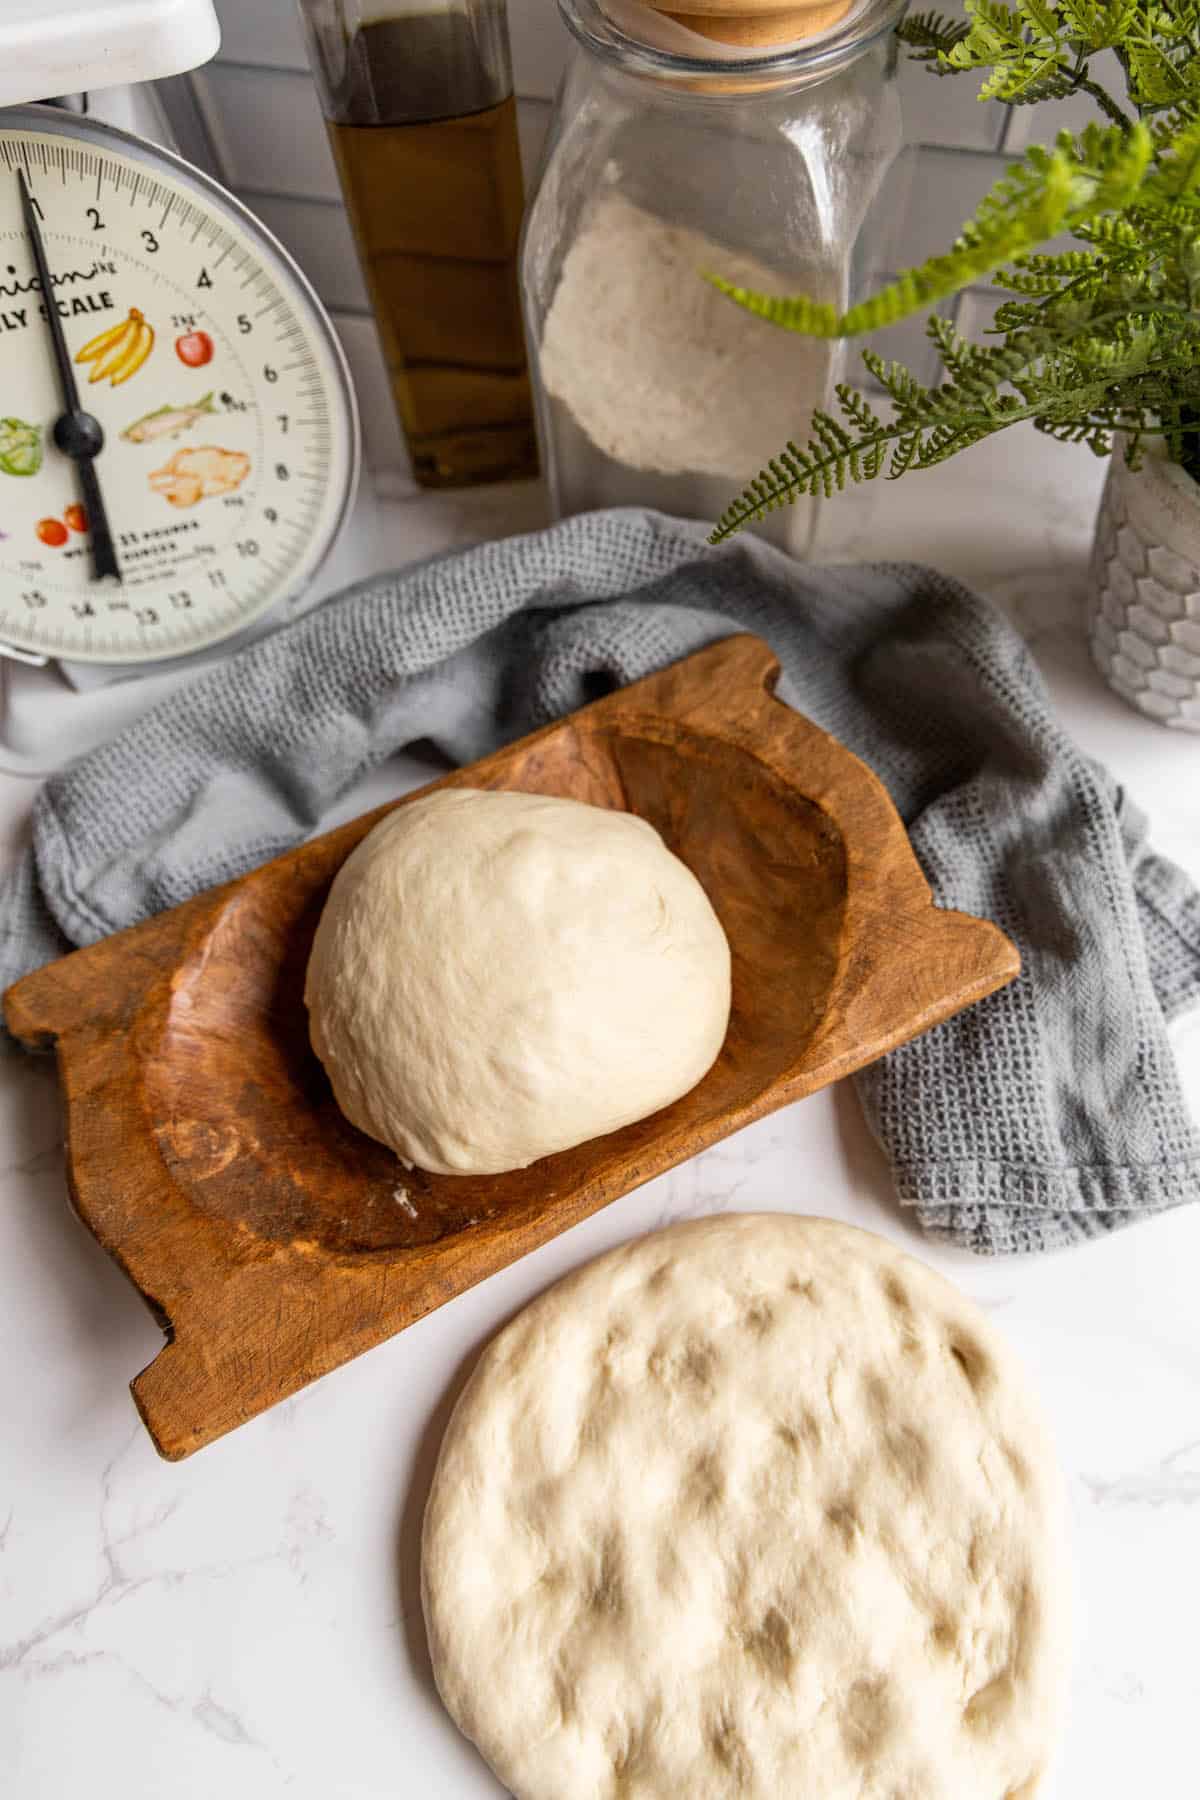 Homemade pizza dough on a wooden cutting board.